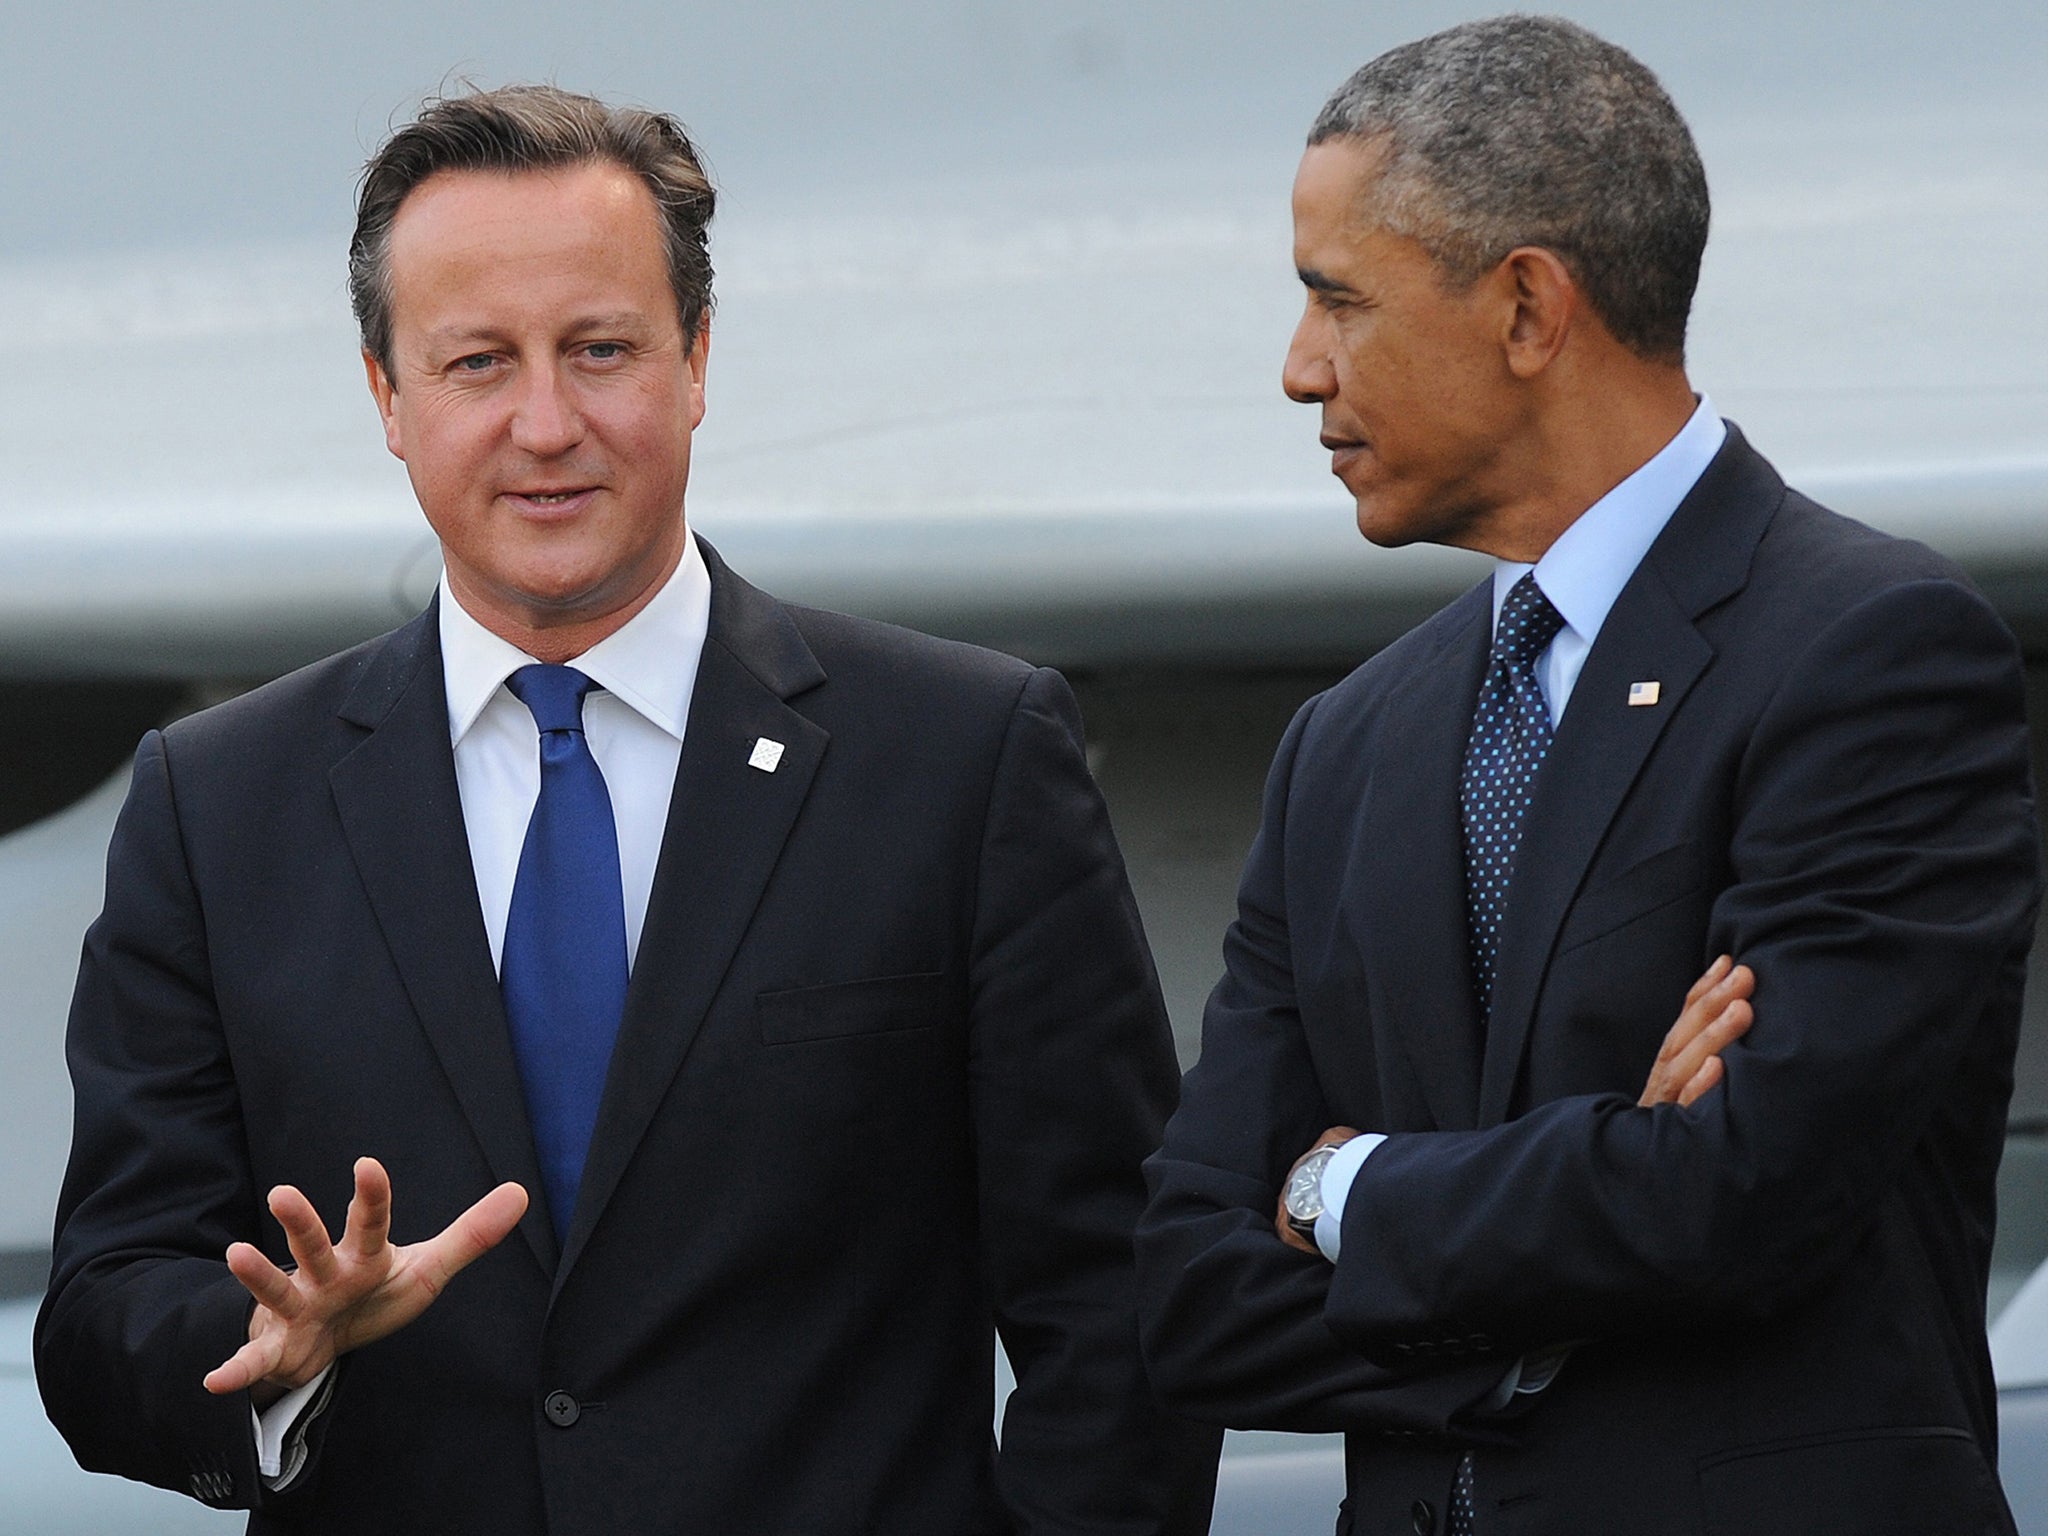 David Cameron and Barack Obama last year. The two leaders will discuss ways of bolstering the UK and US economies over the coming days